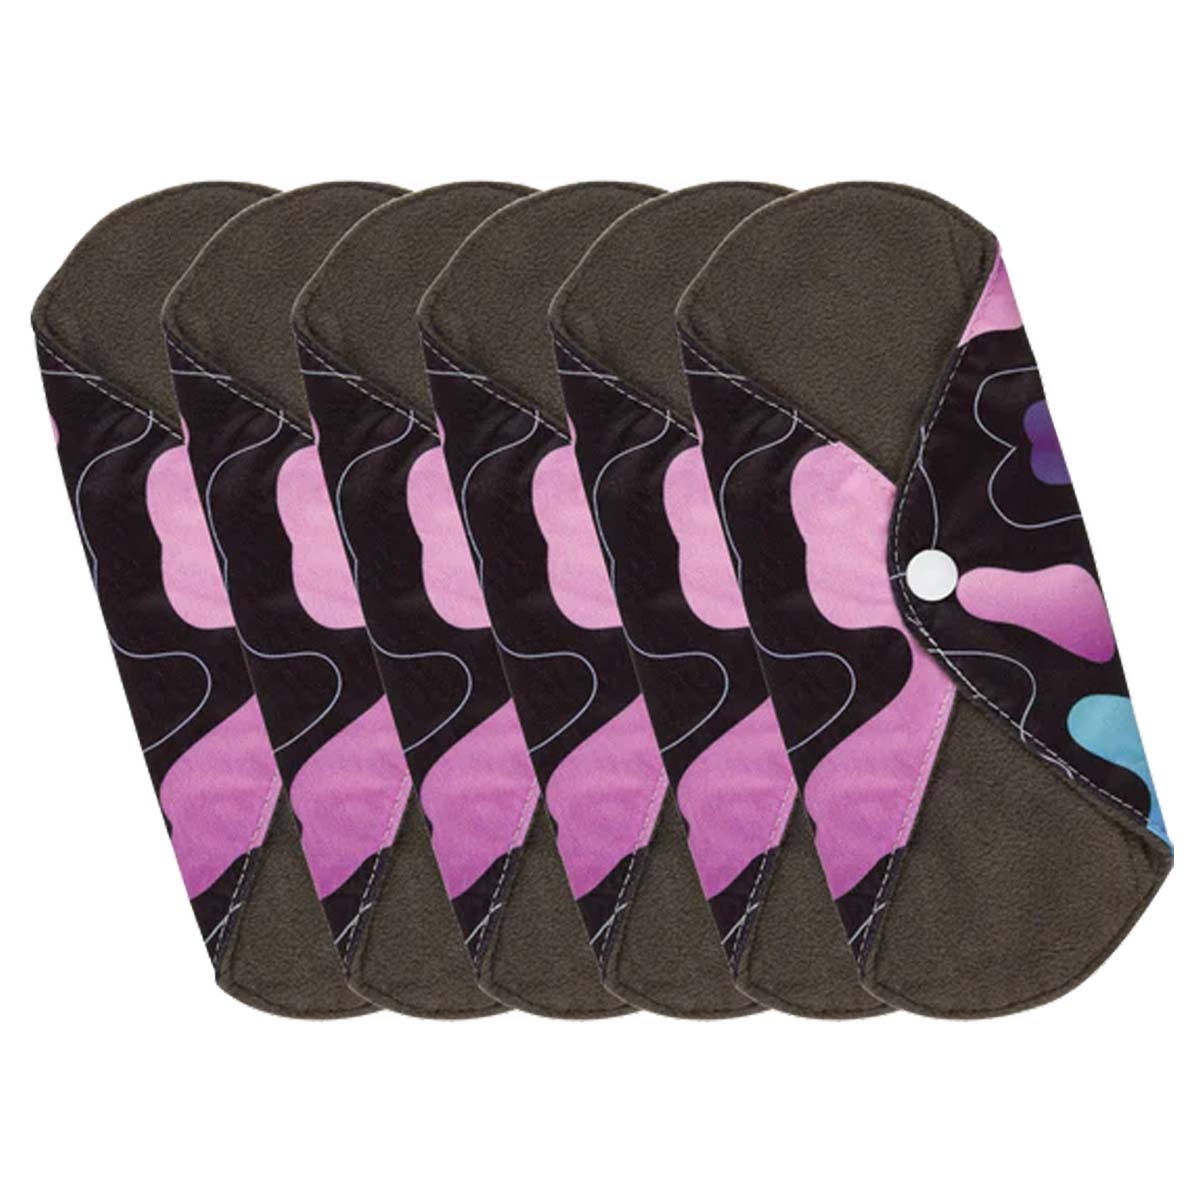 Reusable Sanitary Pads 6 Pack - Medium Flow - Peace With The Wild